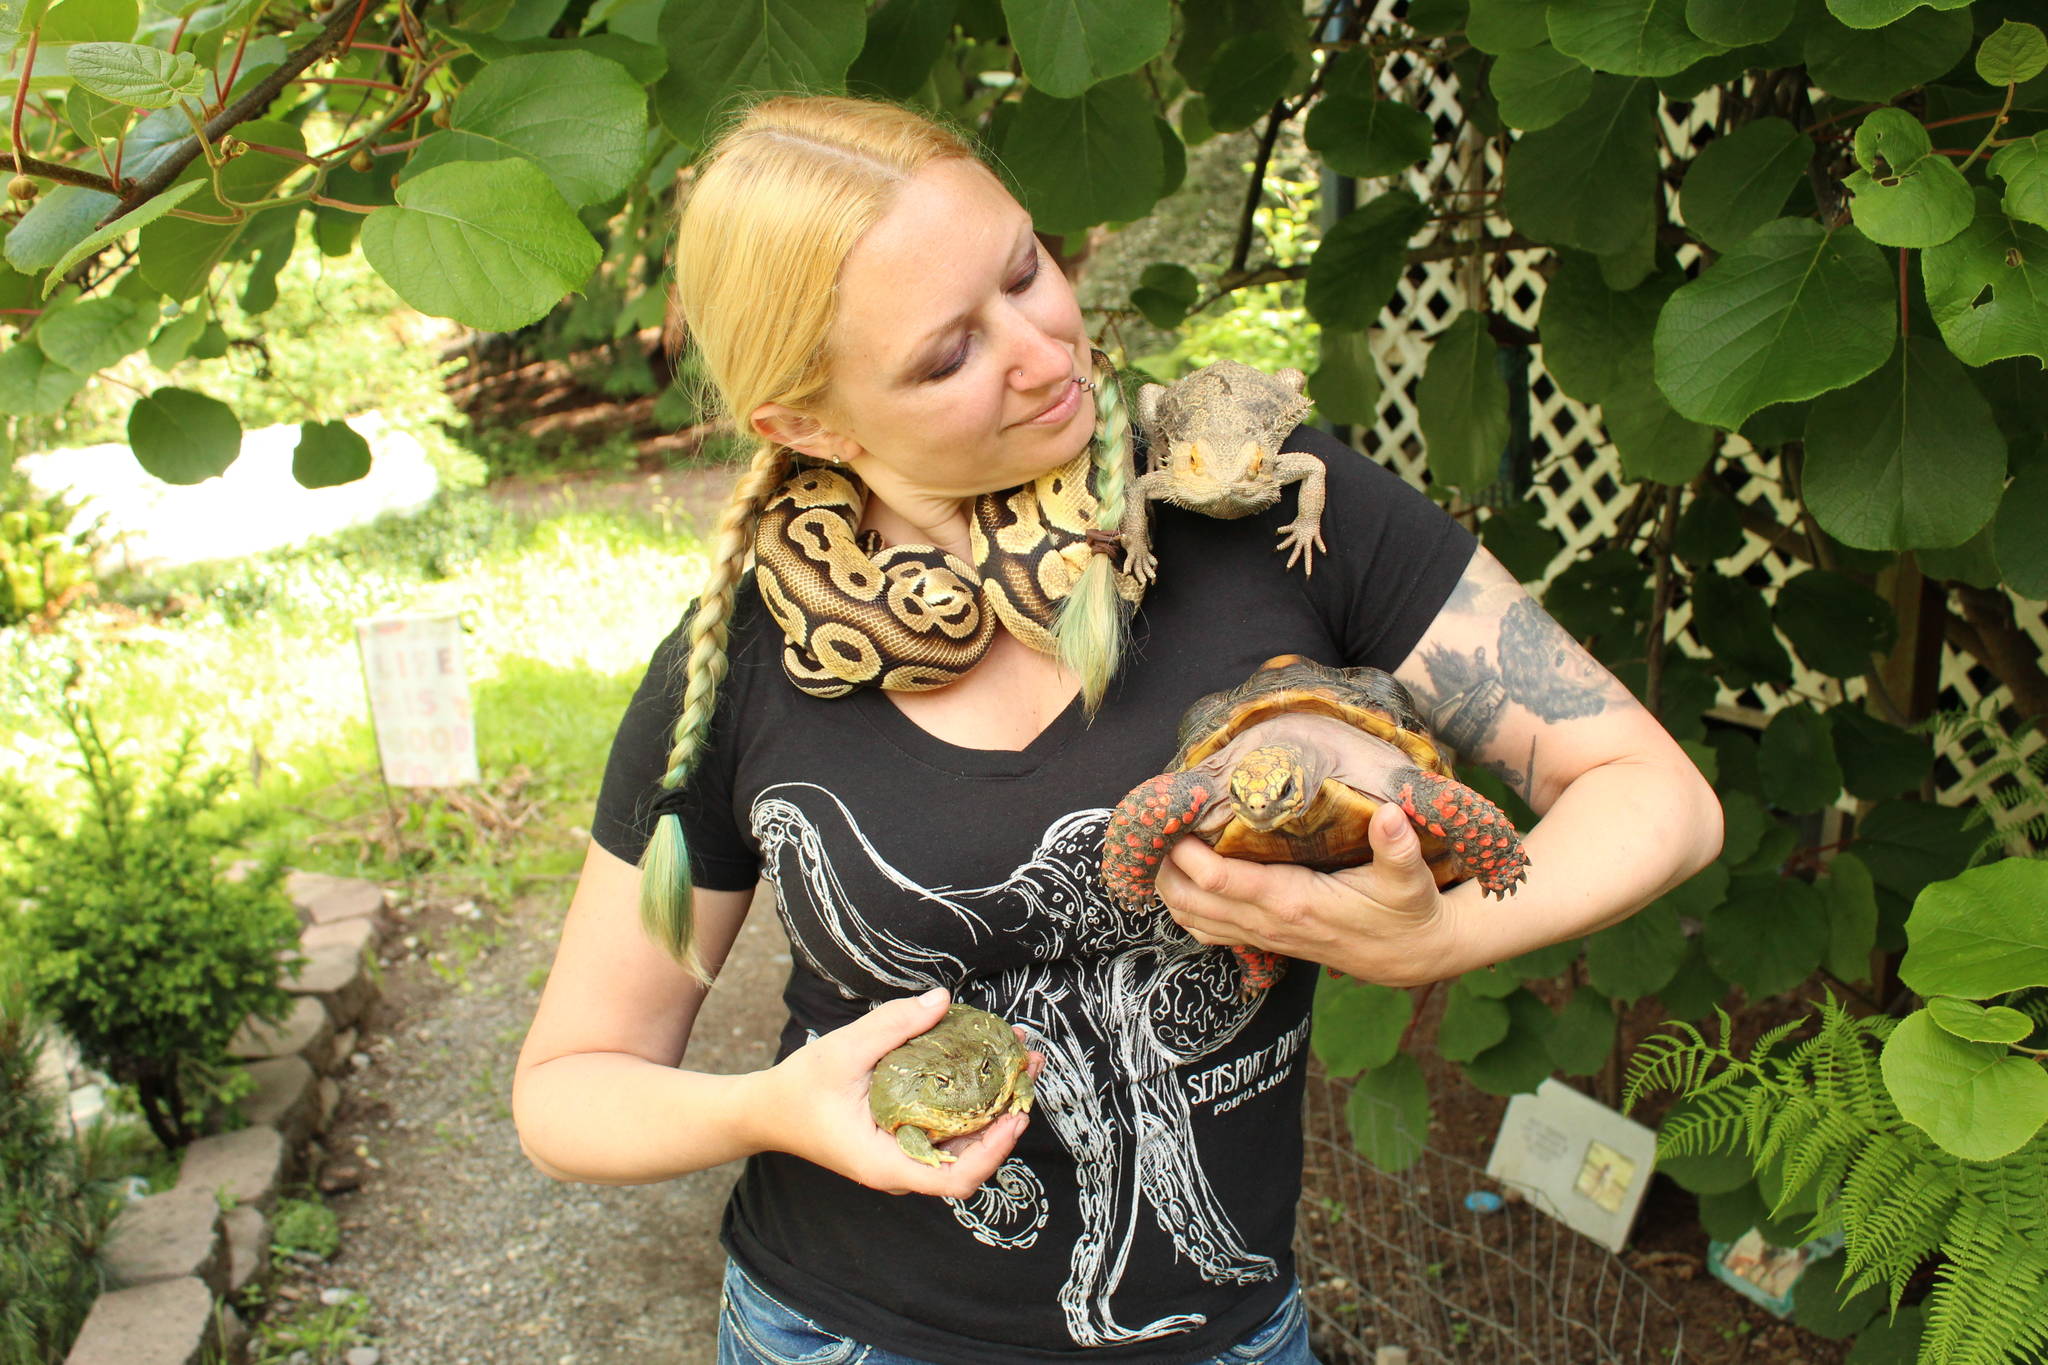 Amanda Ferrara poses with ball python Lemon, bearded dragon Drogon, red-footed tortoise Bus, and pixie frog Cartman. (Photo by Karina Andrew/Whidbey News-Times)